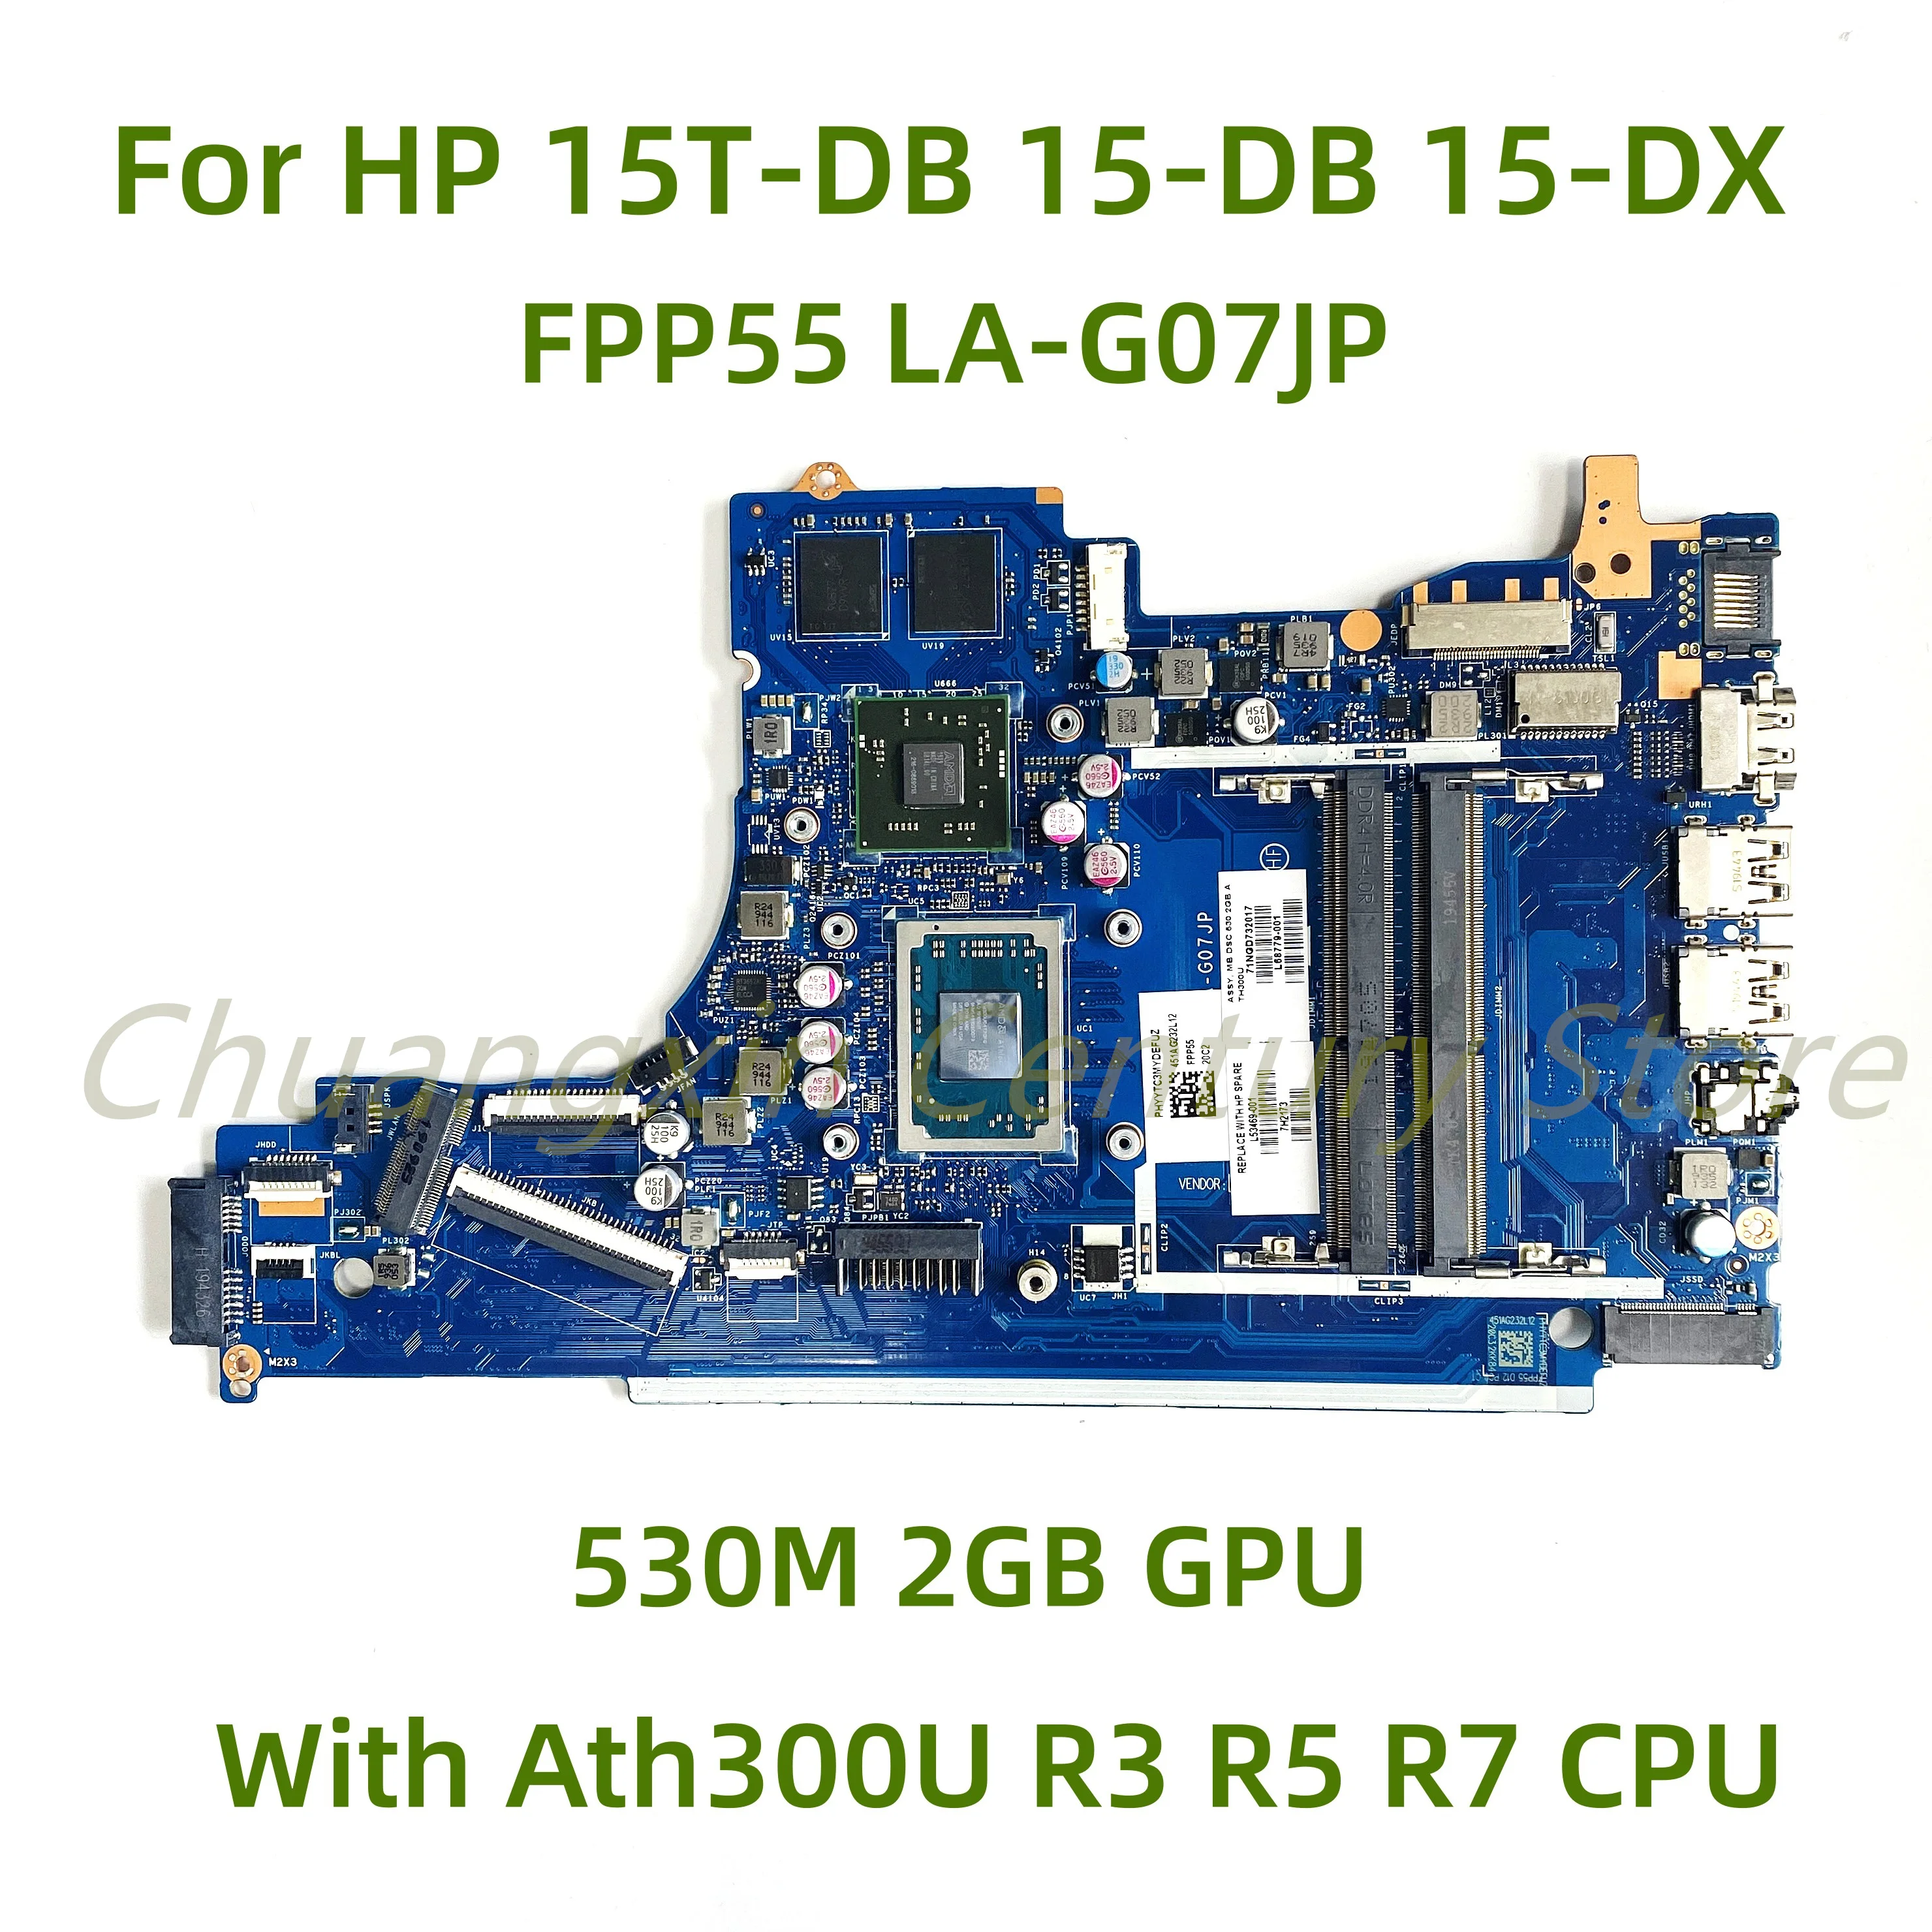 

For HP 15T-DB 15-DB 15-DX laptop motherboard FPP55 LA-G07JP with Ath300U R3 R5 R7 CPU 530M 2GB GPU 100% Tested Full Work